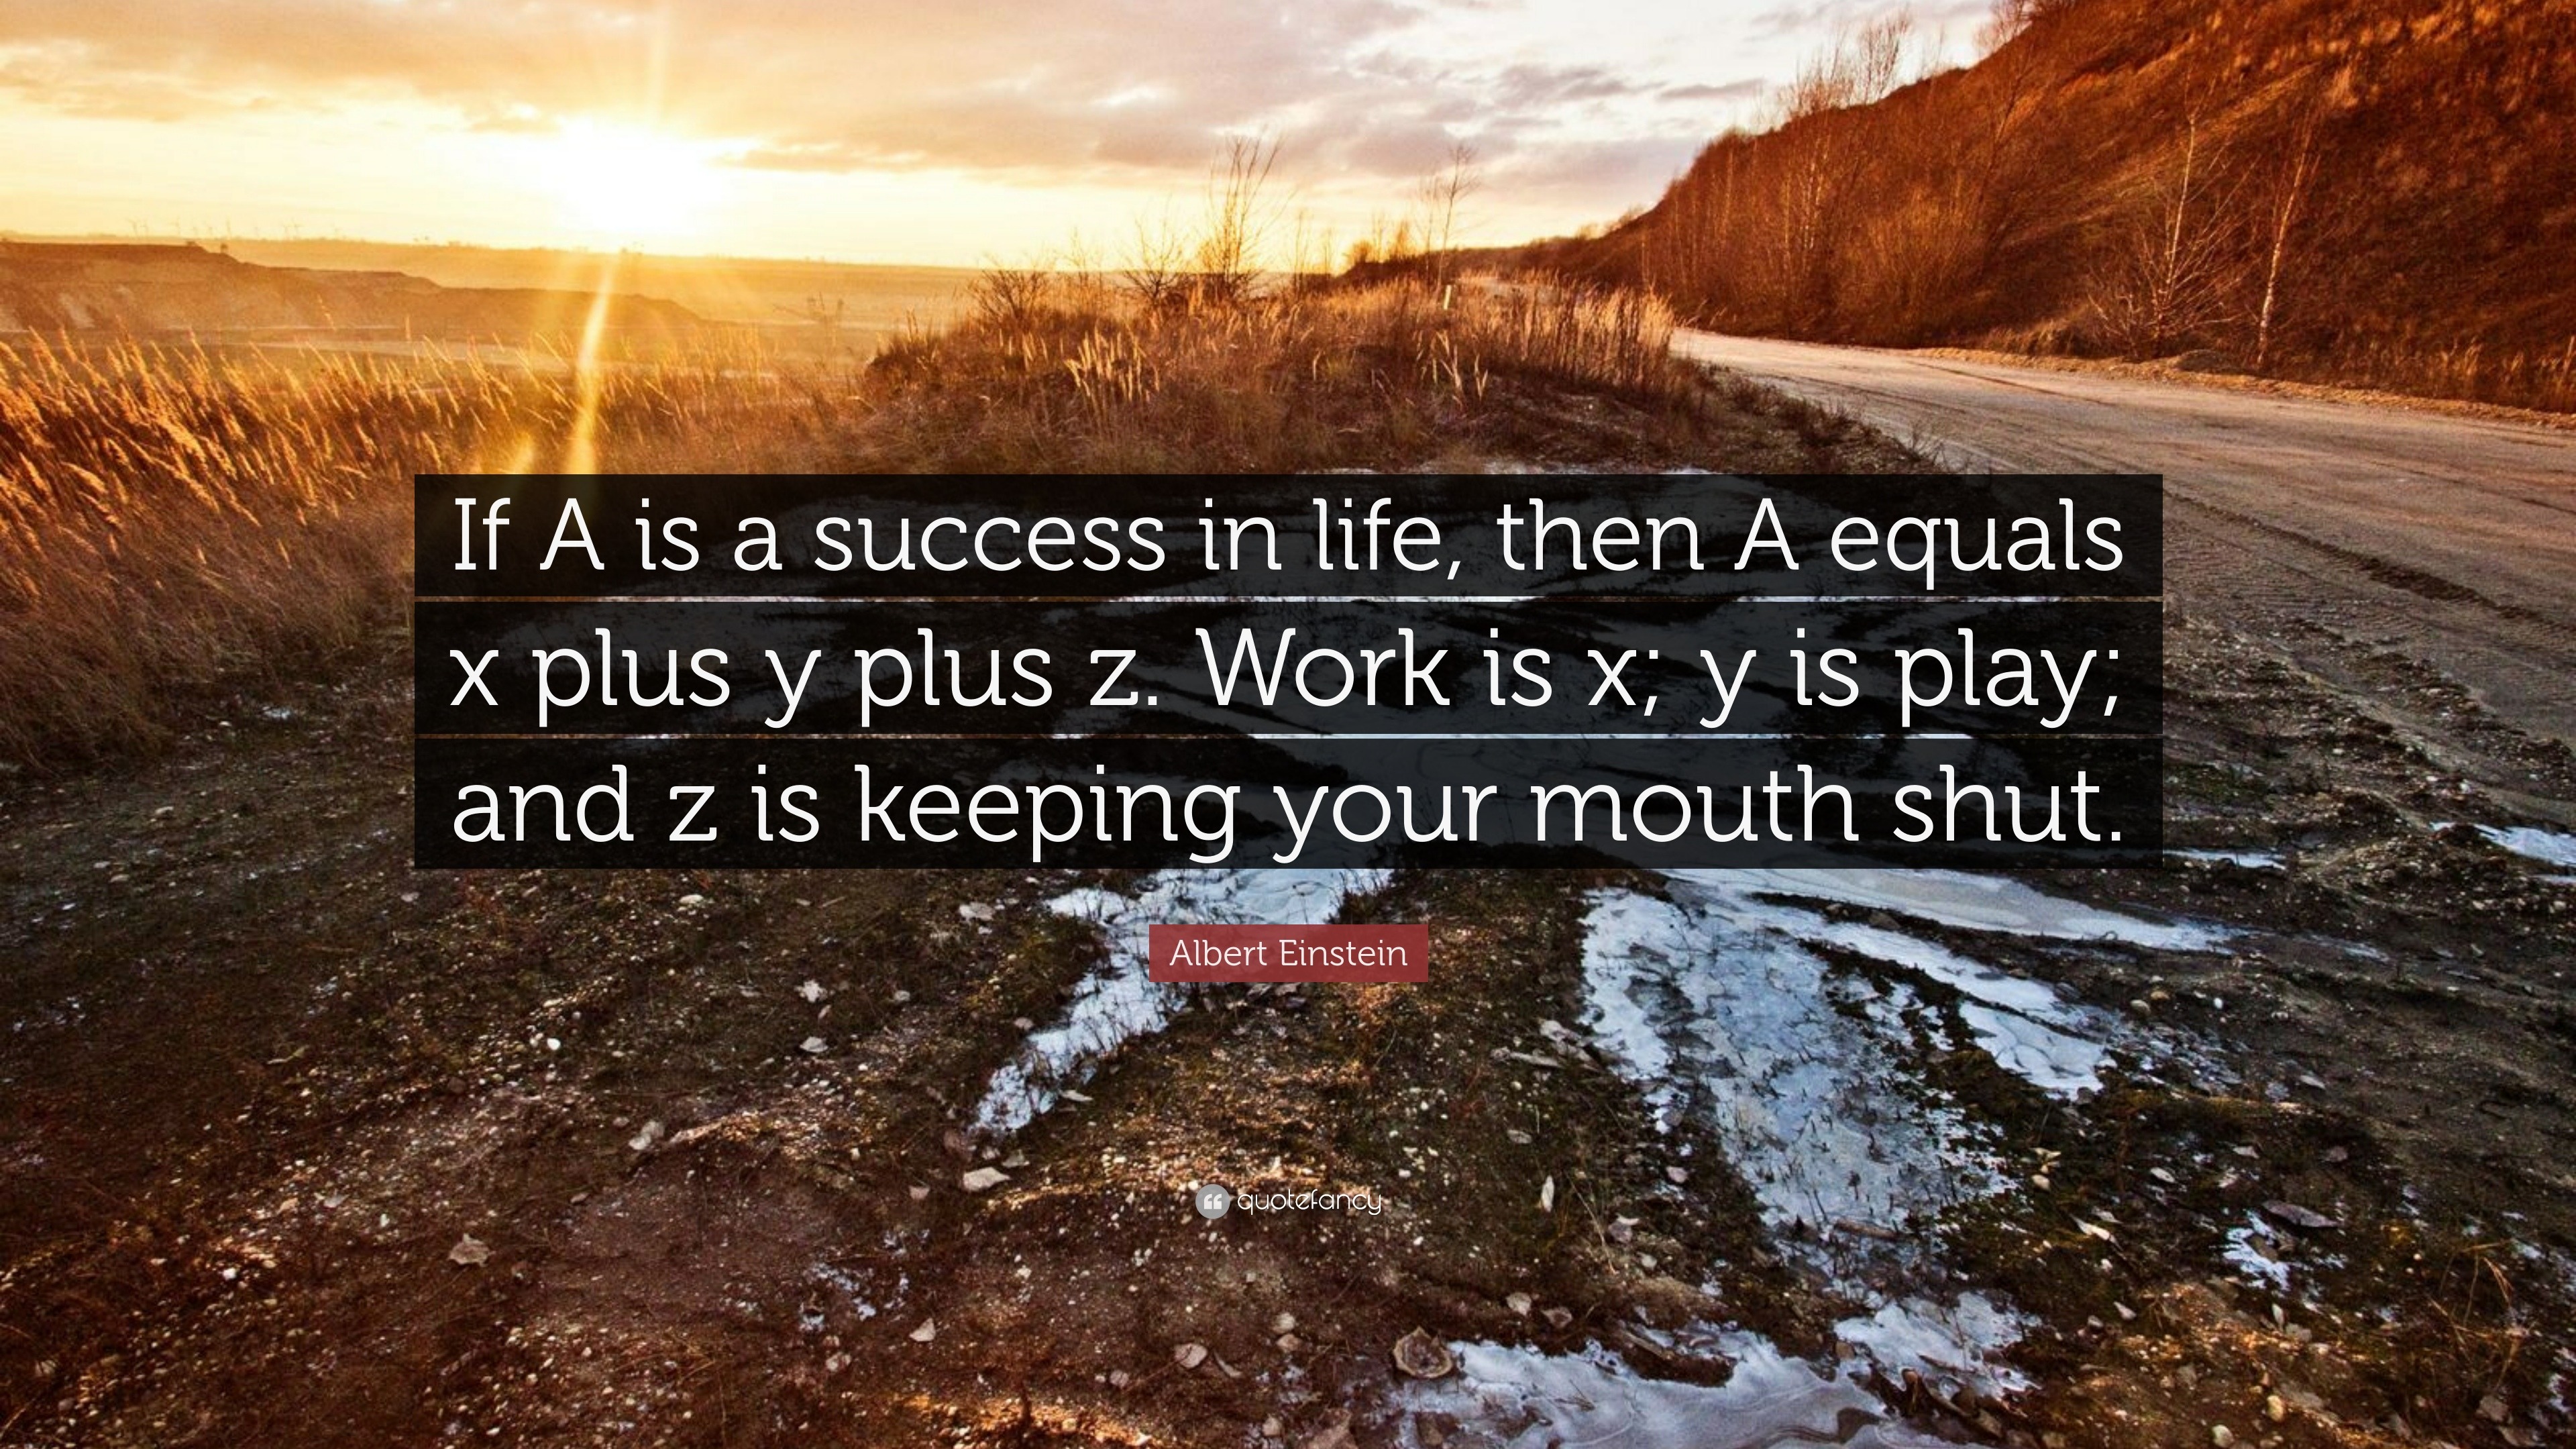 Albert Einstein Quote “If A is a success in life then A equals